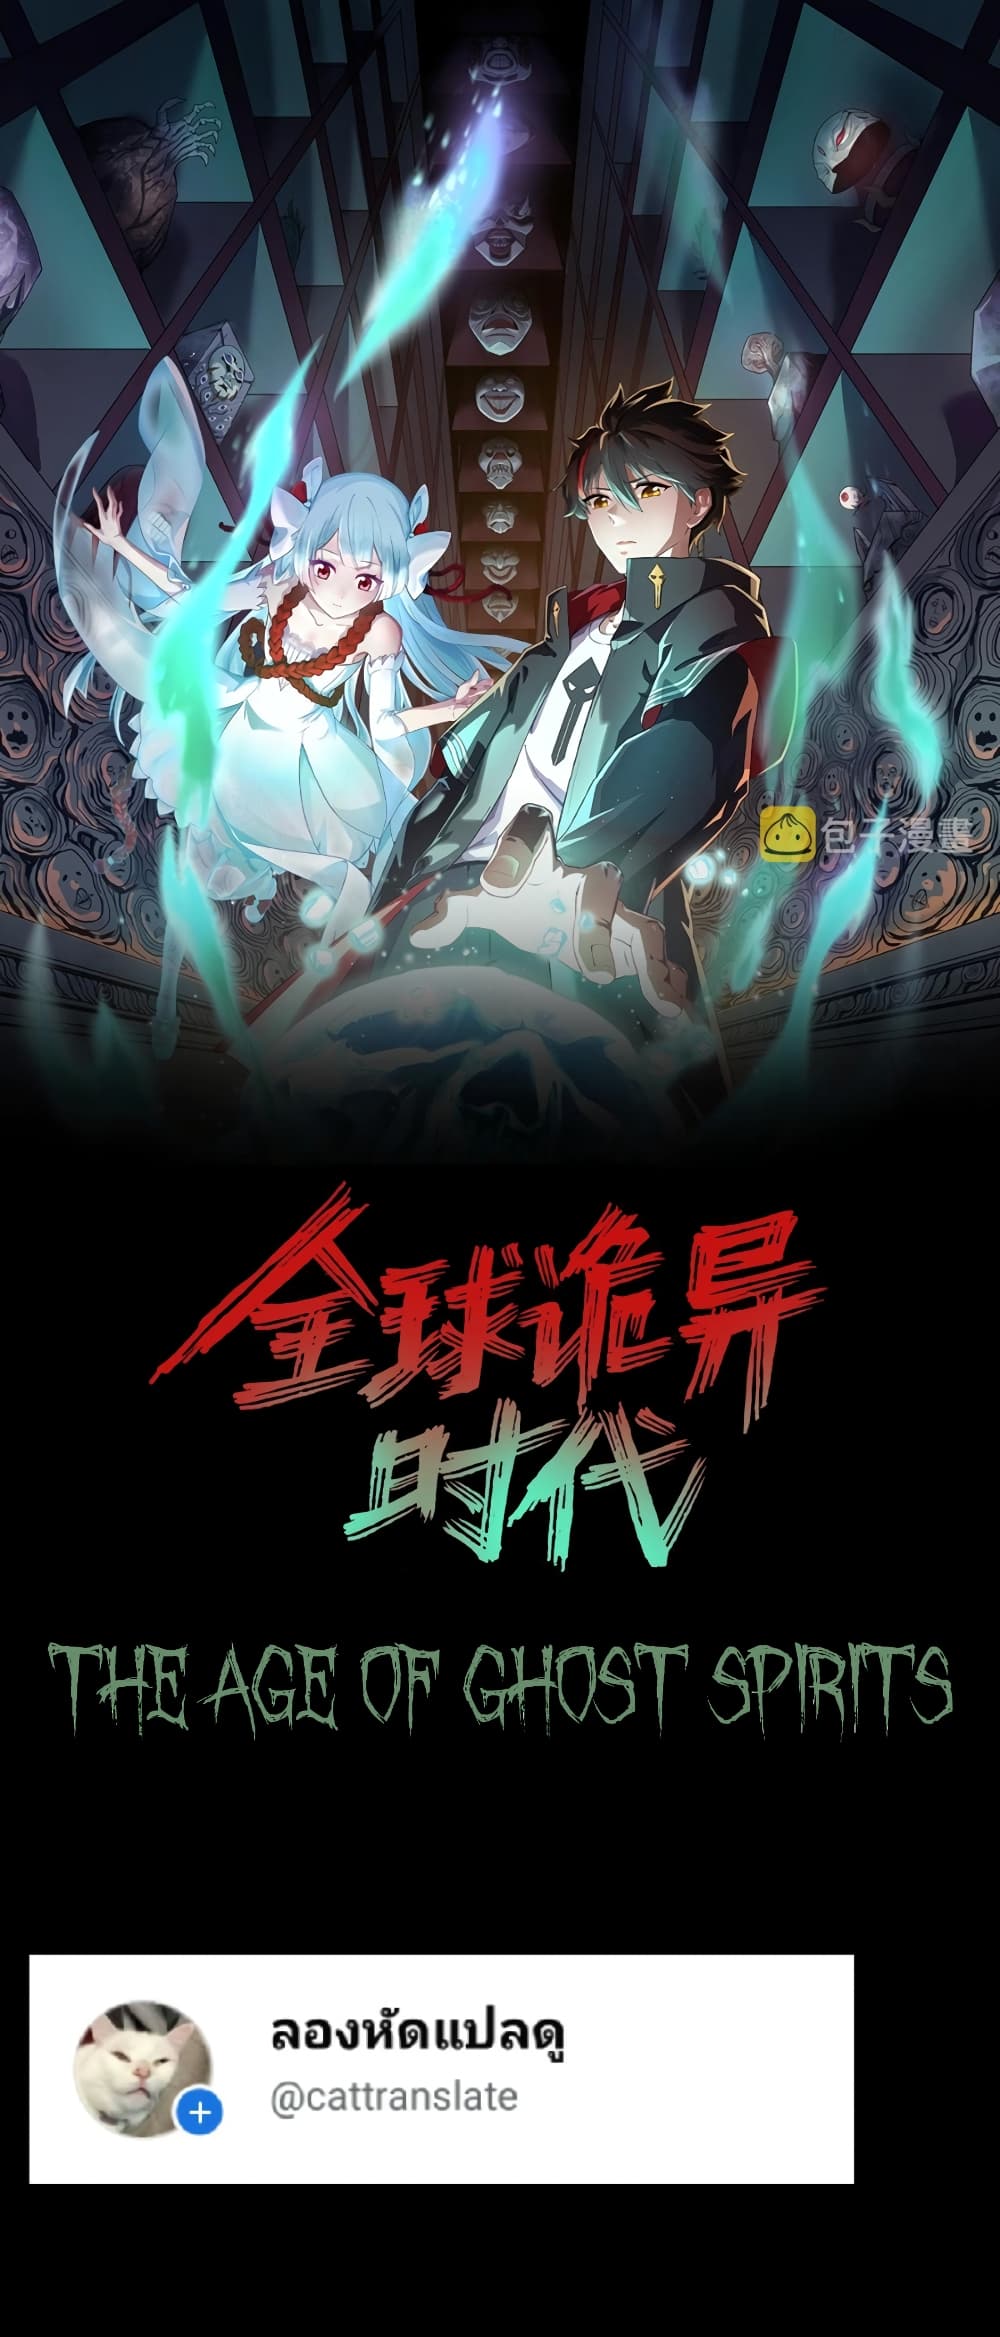 The Age of Ghost Spirits à¸à¸­à¸à¸à¸µà¹ 28 (1)